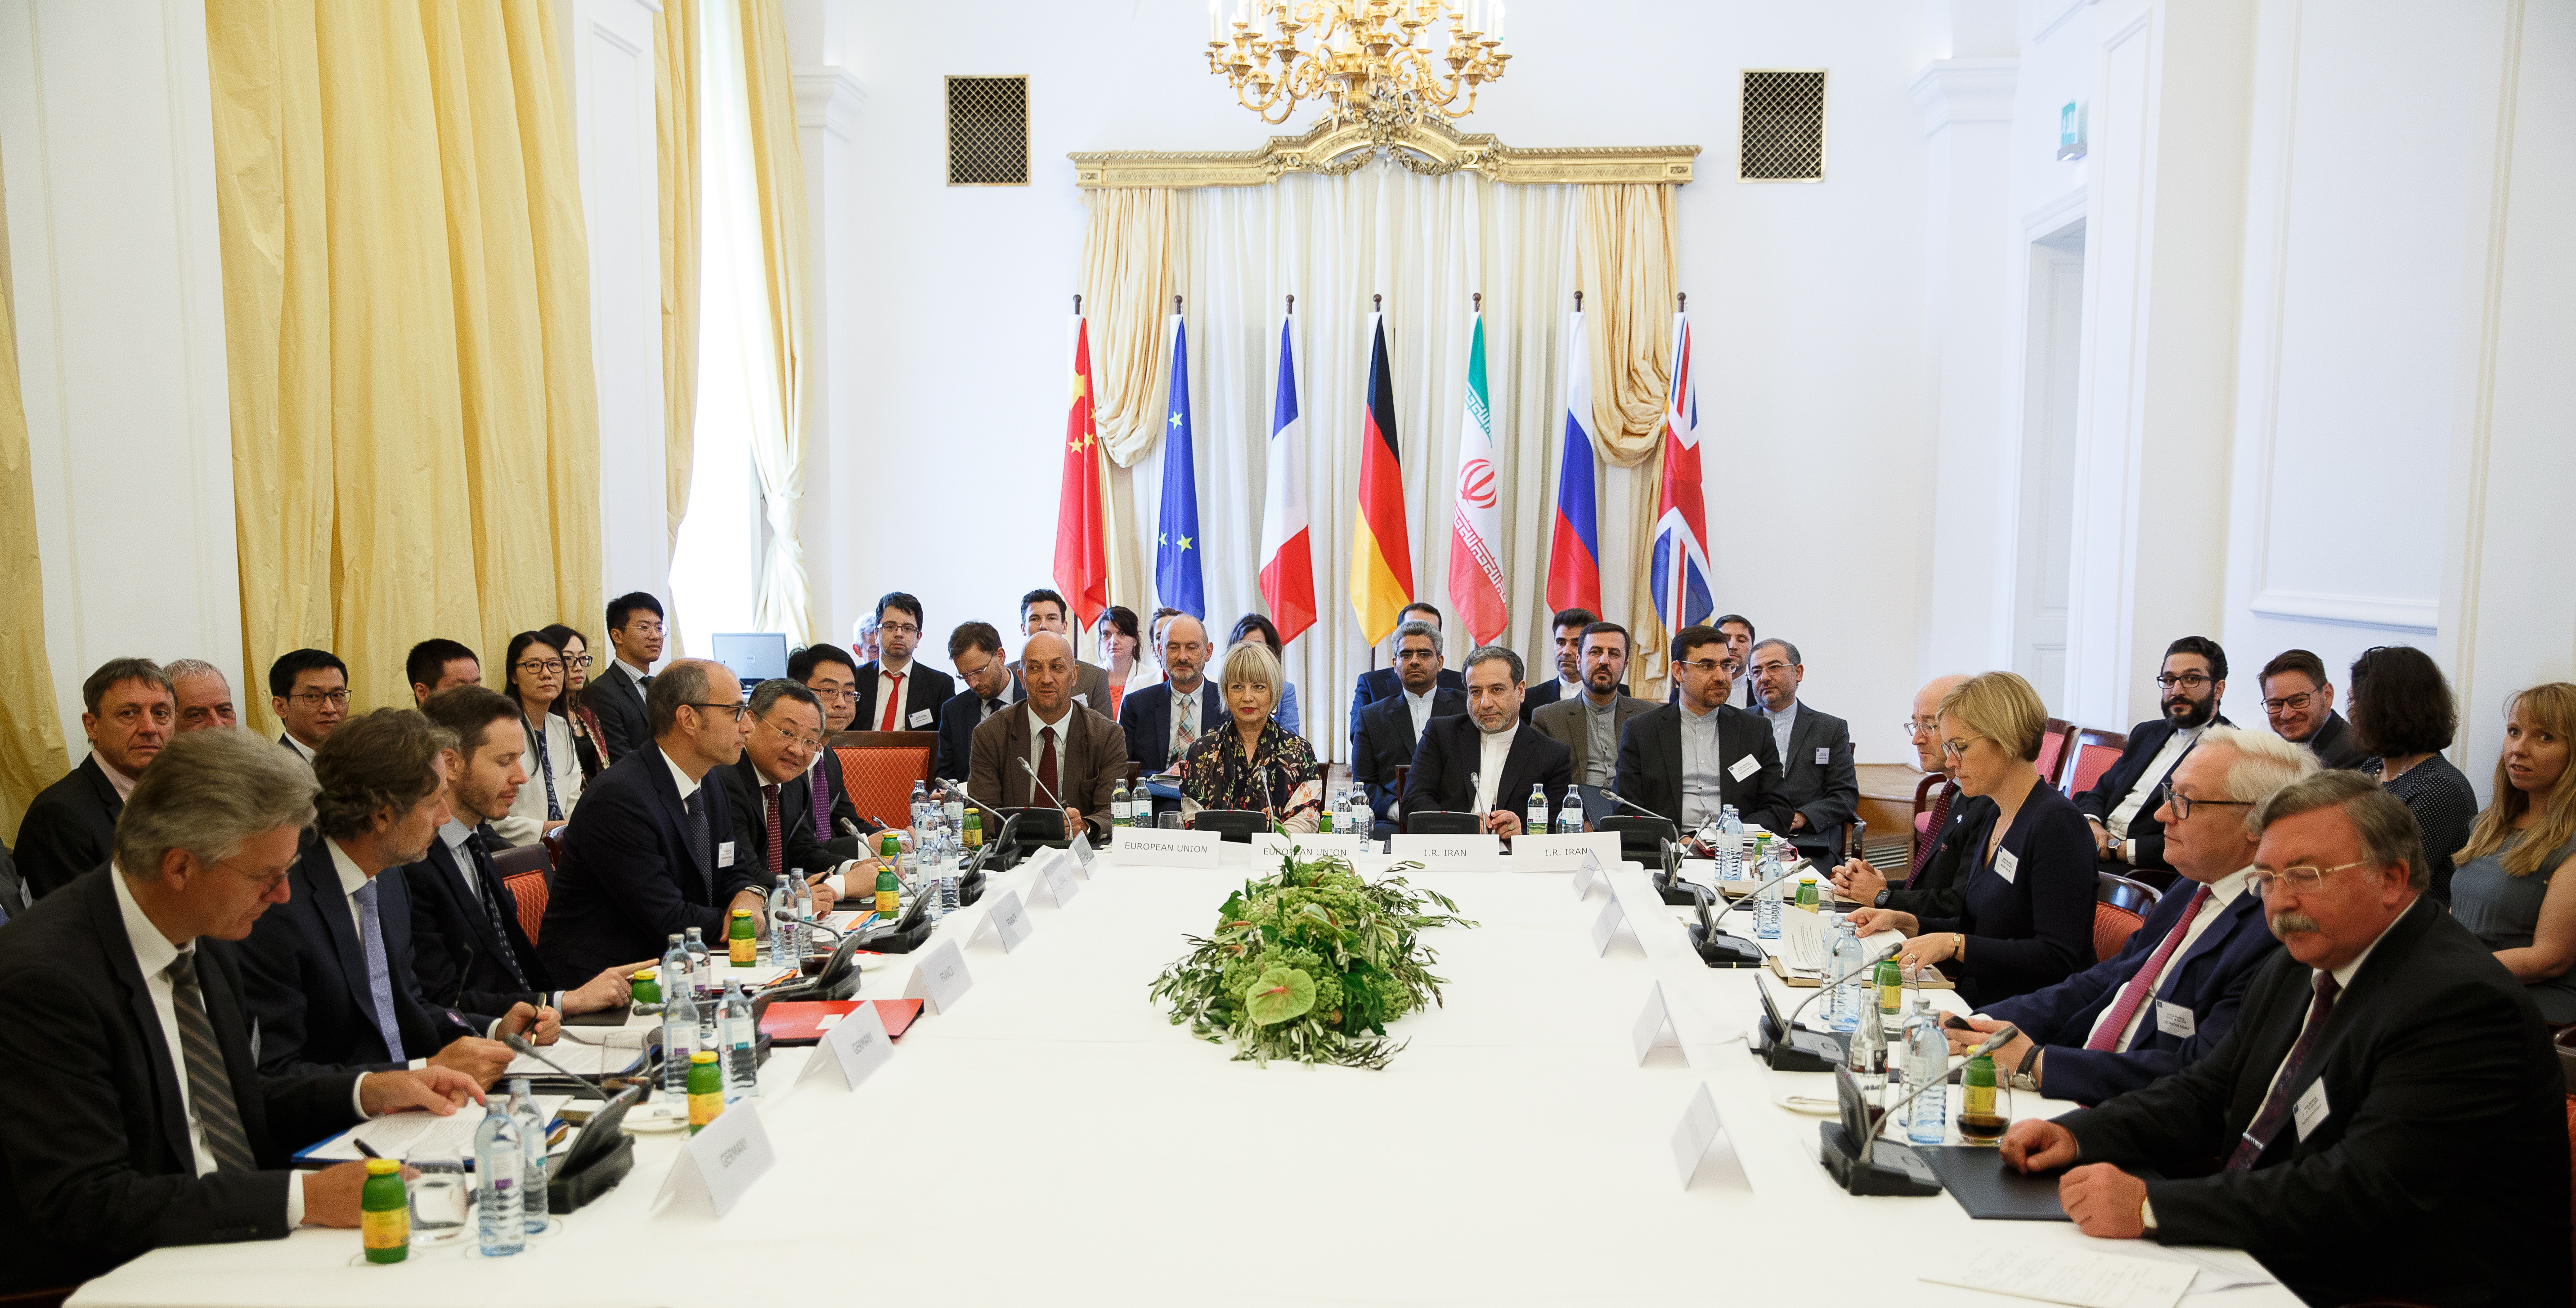 epa07745548 EU director Helga Schmid (2-L) and Iranian Deputy-Foreign Ministers Abbas Araghchi (2-R) attend an extraordinary JCPOA Joint Commission meeting at the Palais Coburg, in Vienna, Austria, 28 July 2019. The JCPOA Joint Commission meeting at a Political Directors' level is chaired on behalf of European Union High Representative Federica Mogherini by European External Action Service (EEAS) Secretary General Helga Maria Schmid and is attended by E3/EU+2 (Germany, France, the United Kingdom, China, Russia) and Iran.  EPA/FLORIAN WIESER